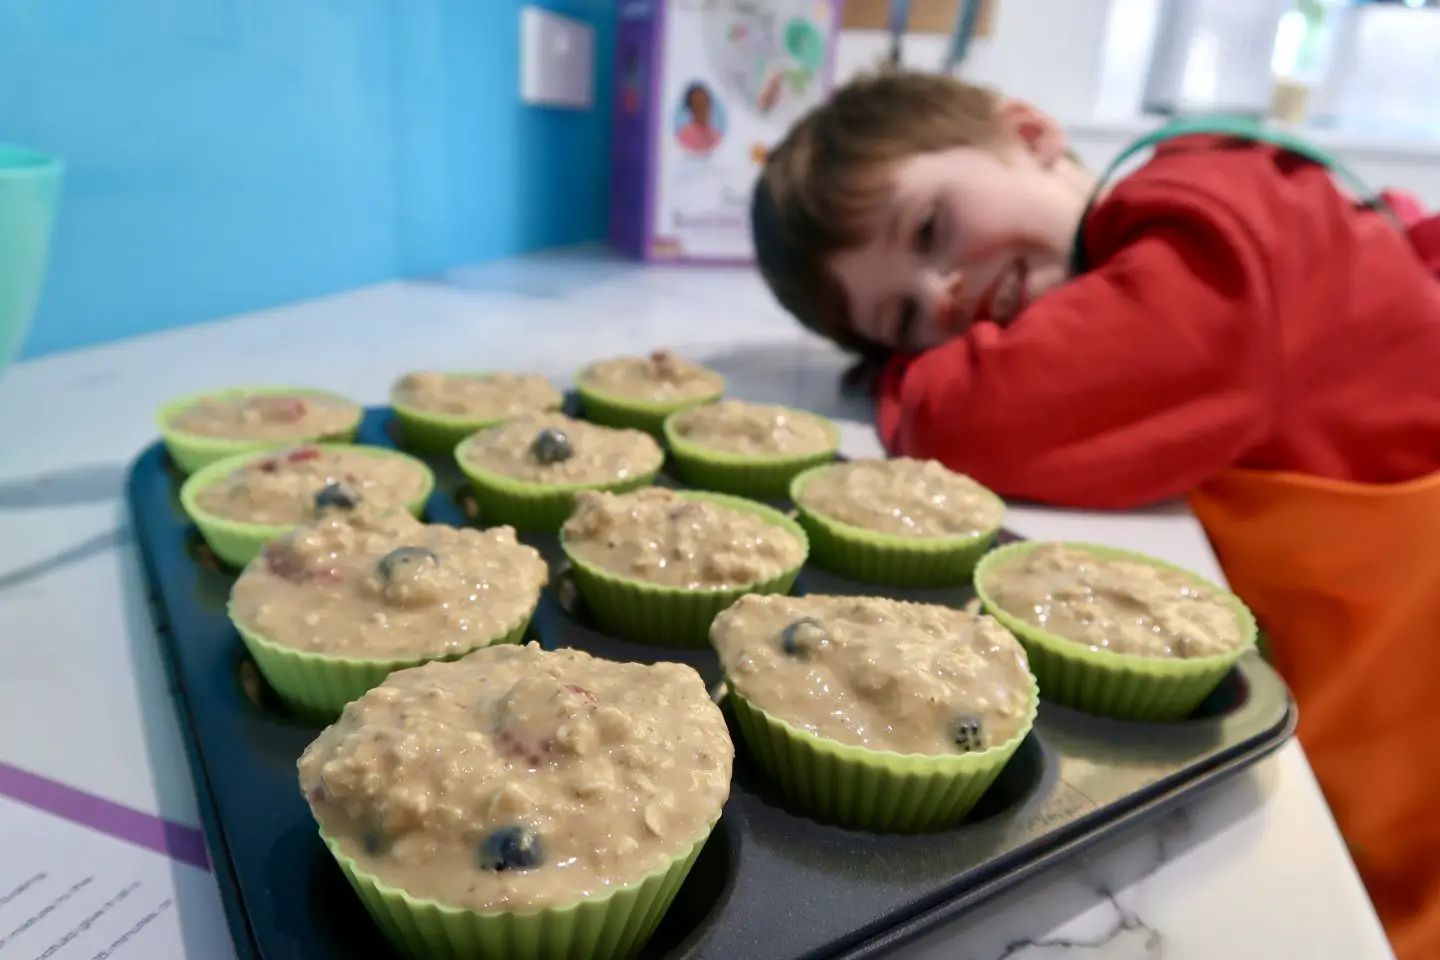 A boy resting his head on a counter and smiling at a tray of muffins about to go in to the oven